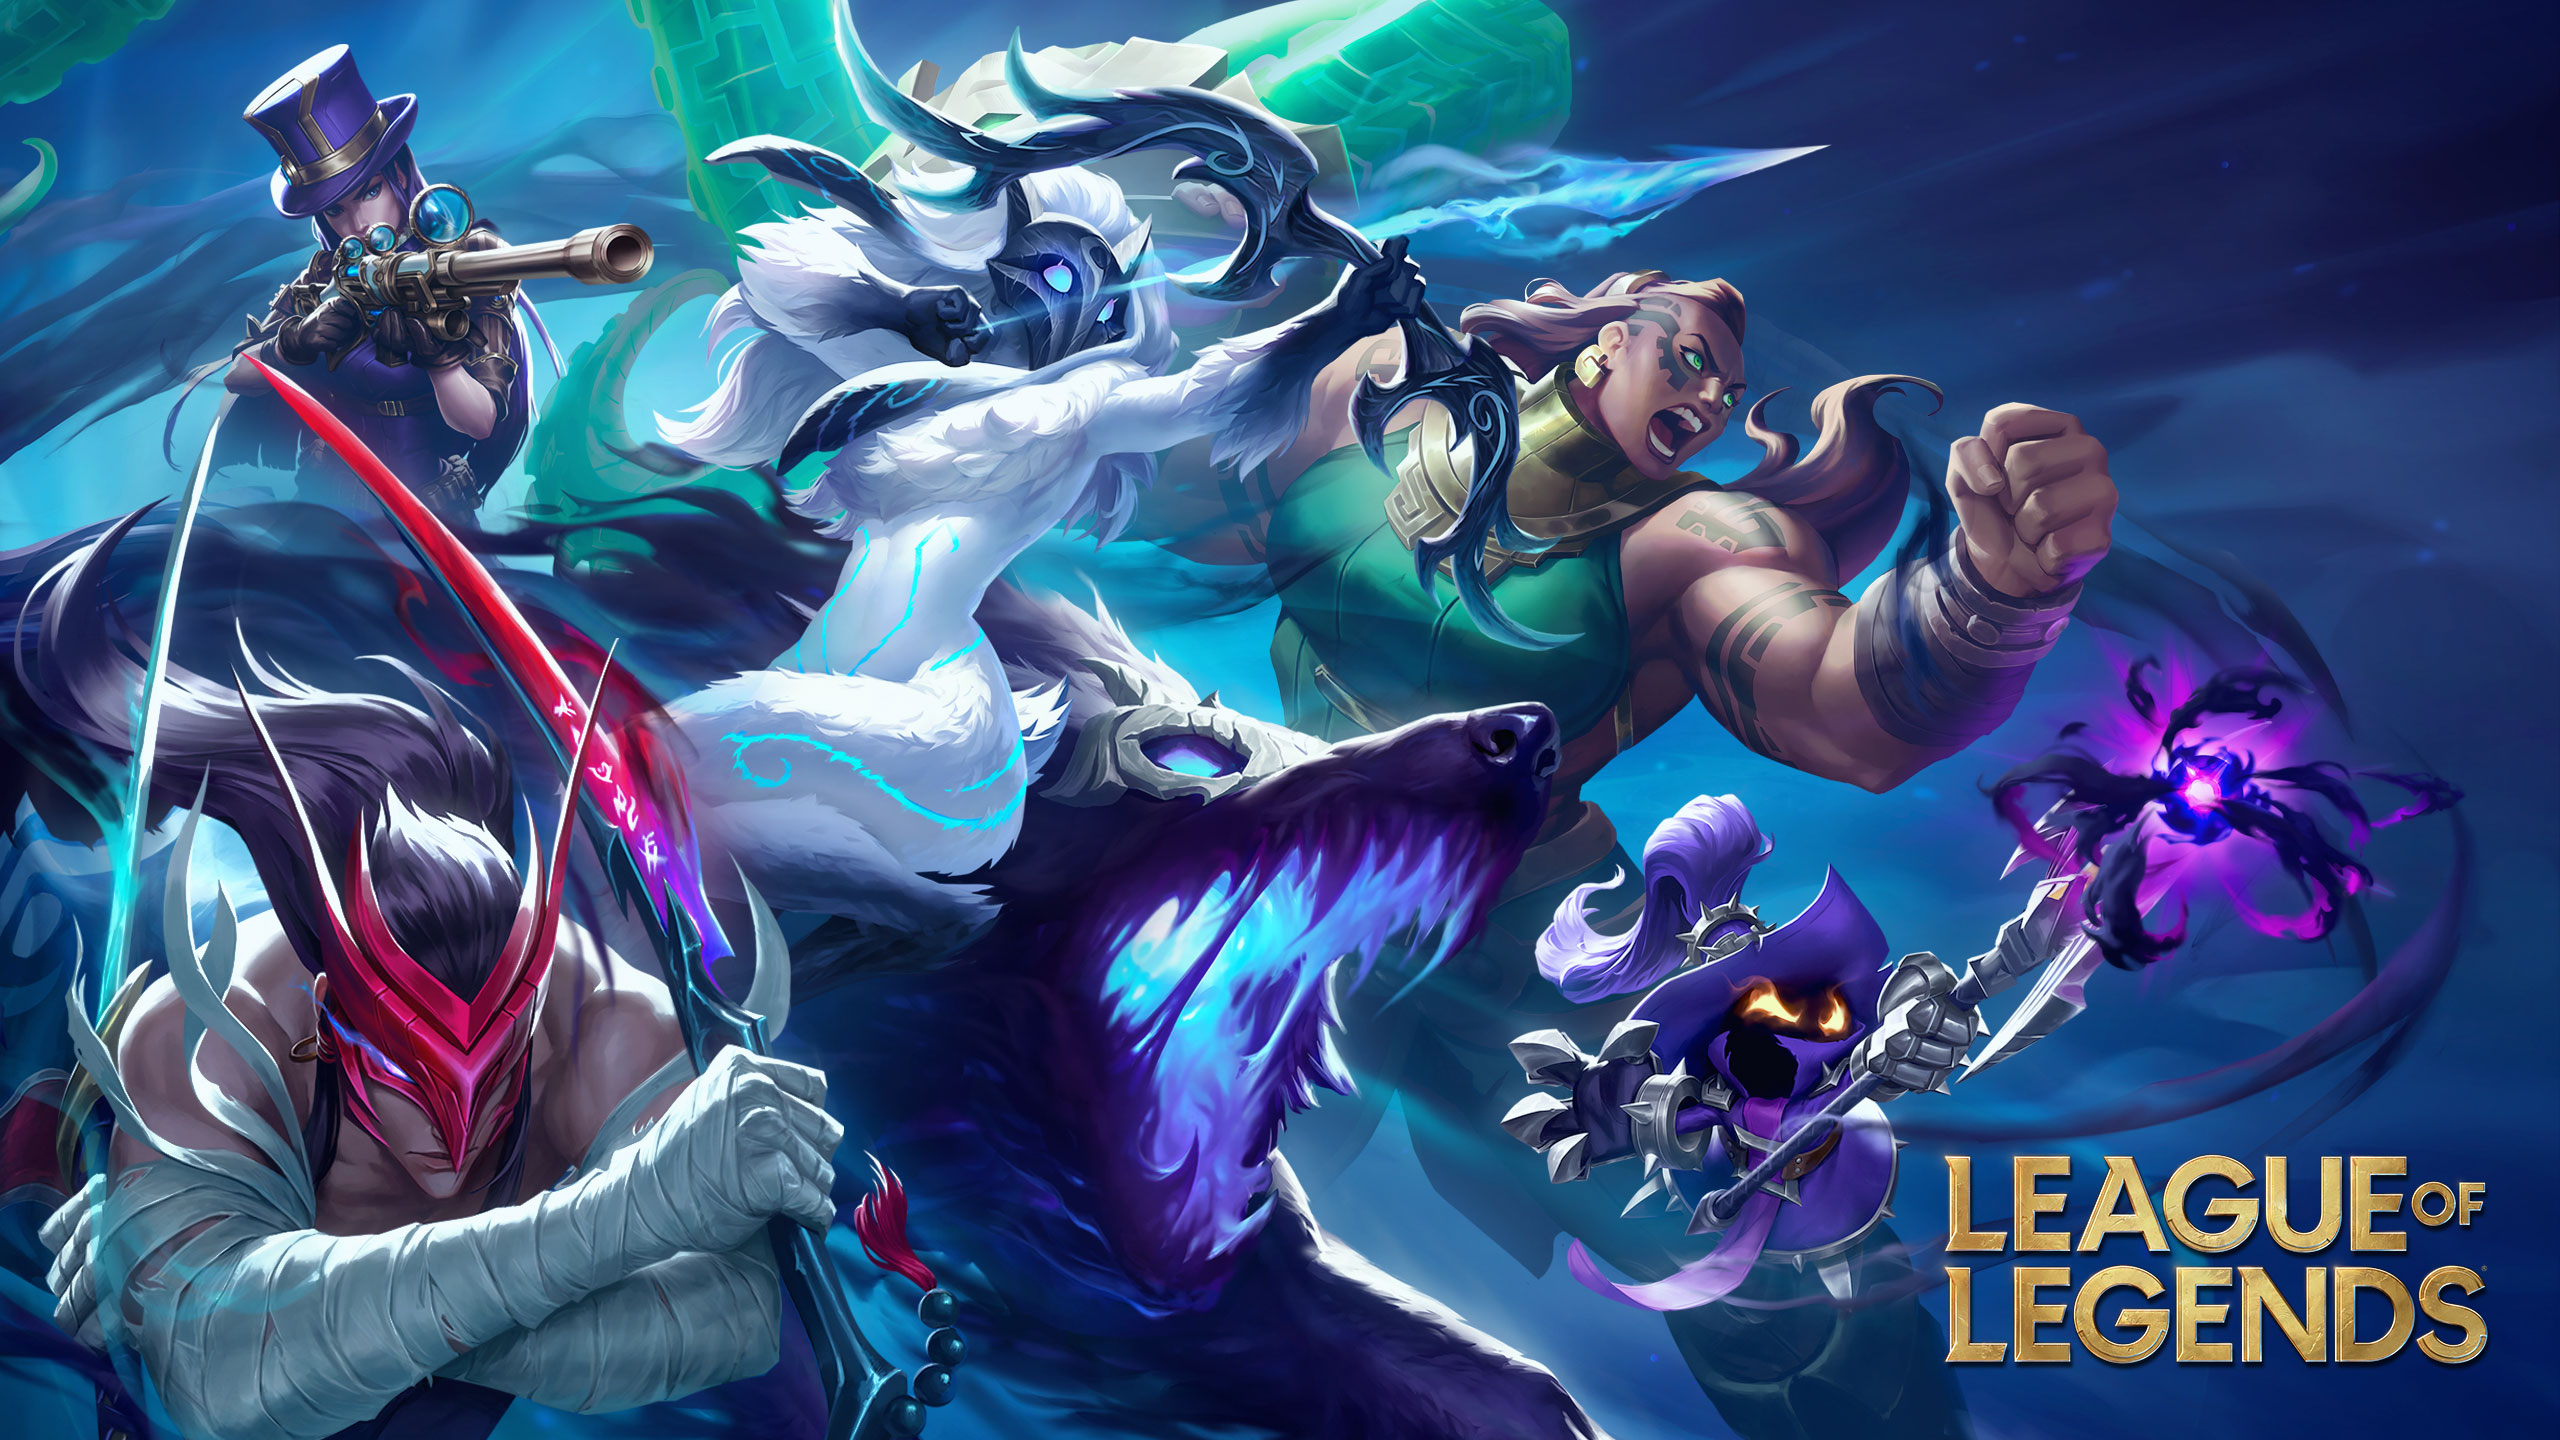 How Well Do You Know League of Legends?